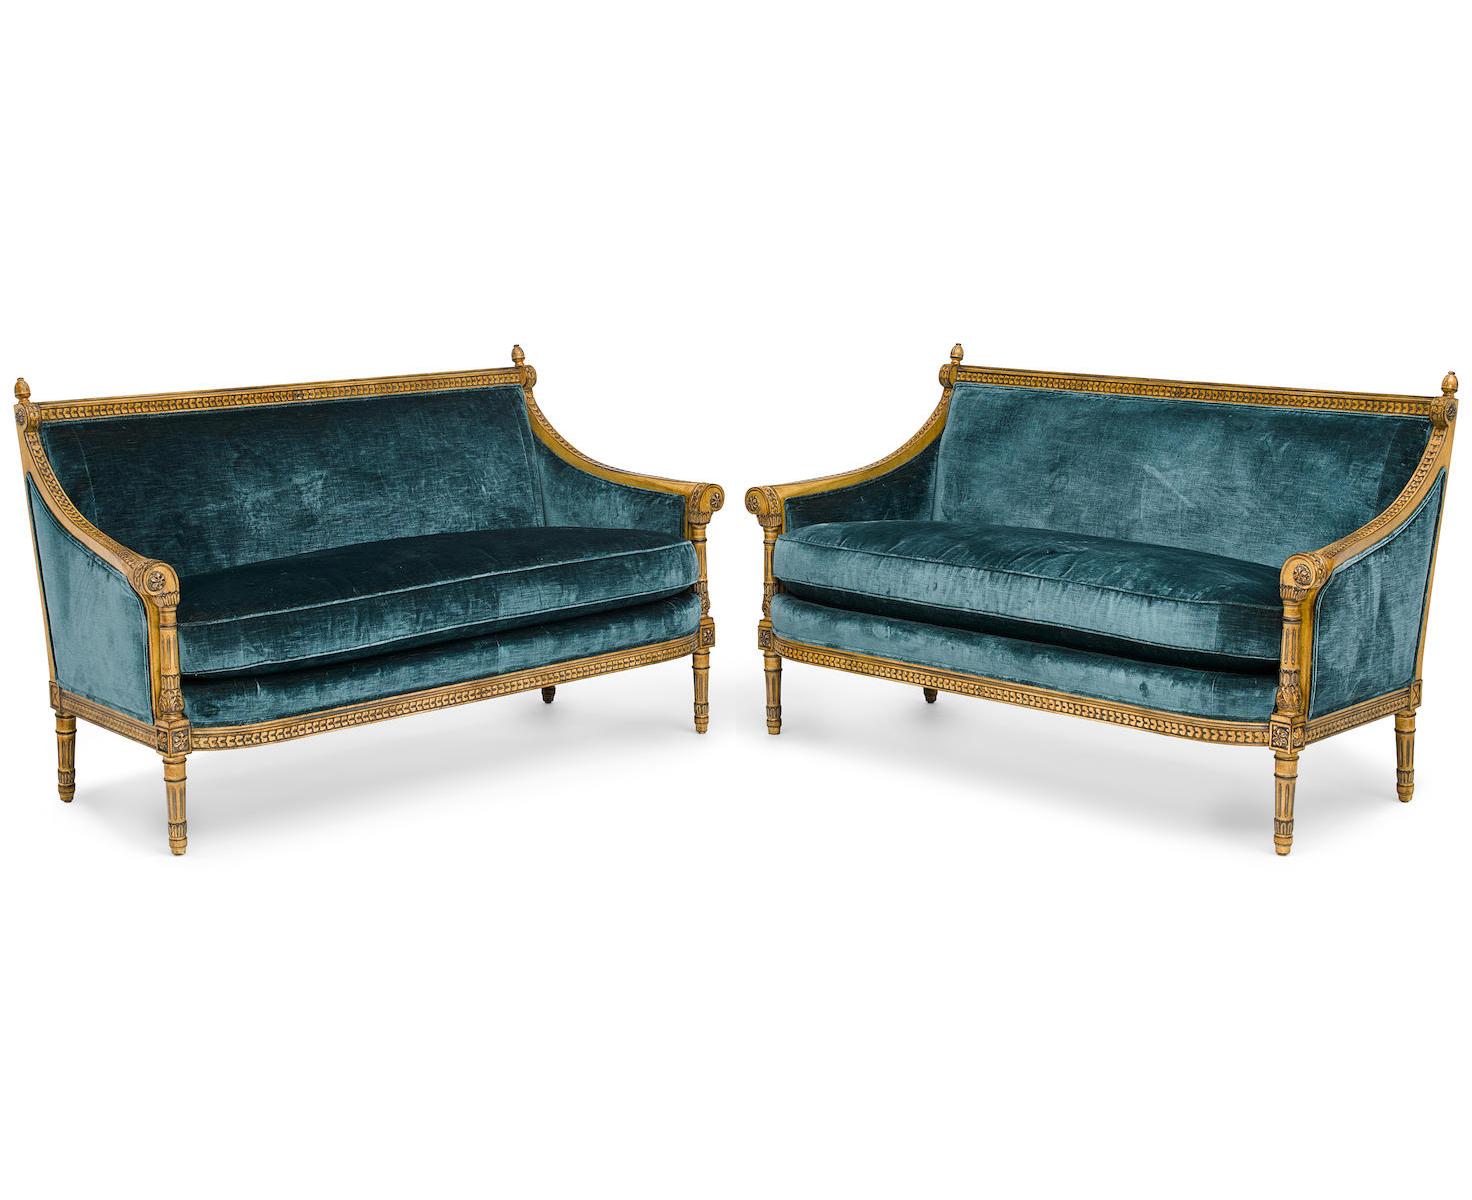 A pair of Louis XVI style carved and Laqué gilded bergère settees. The elegant pair of carved loveseats, upholstered in a blue velvet, with padded backs and sides and a cushion seat, the swagged armrests decorated with floral rosettes and topped